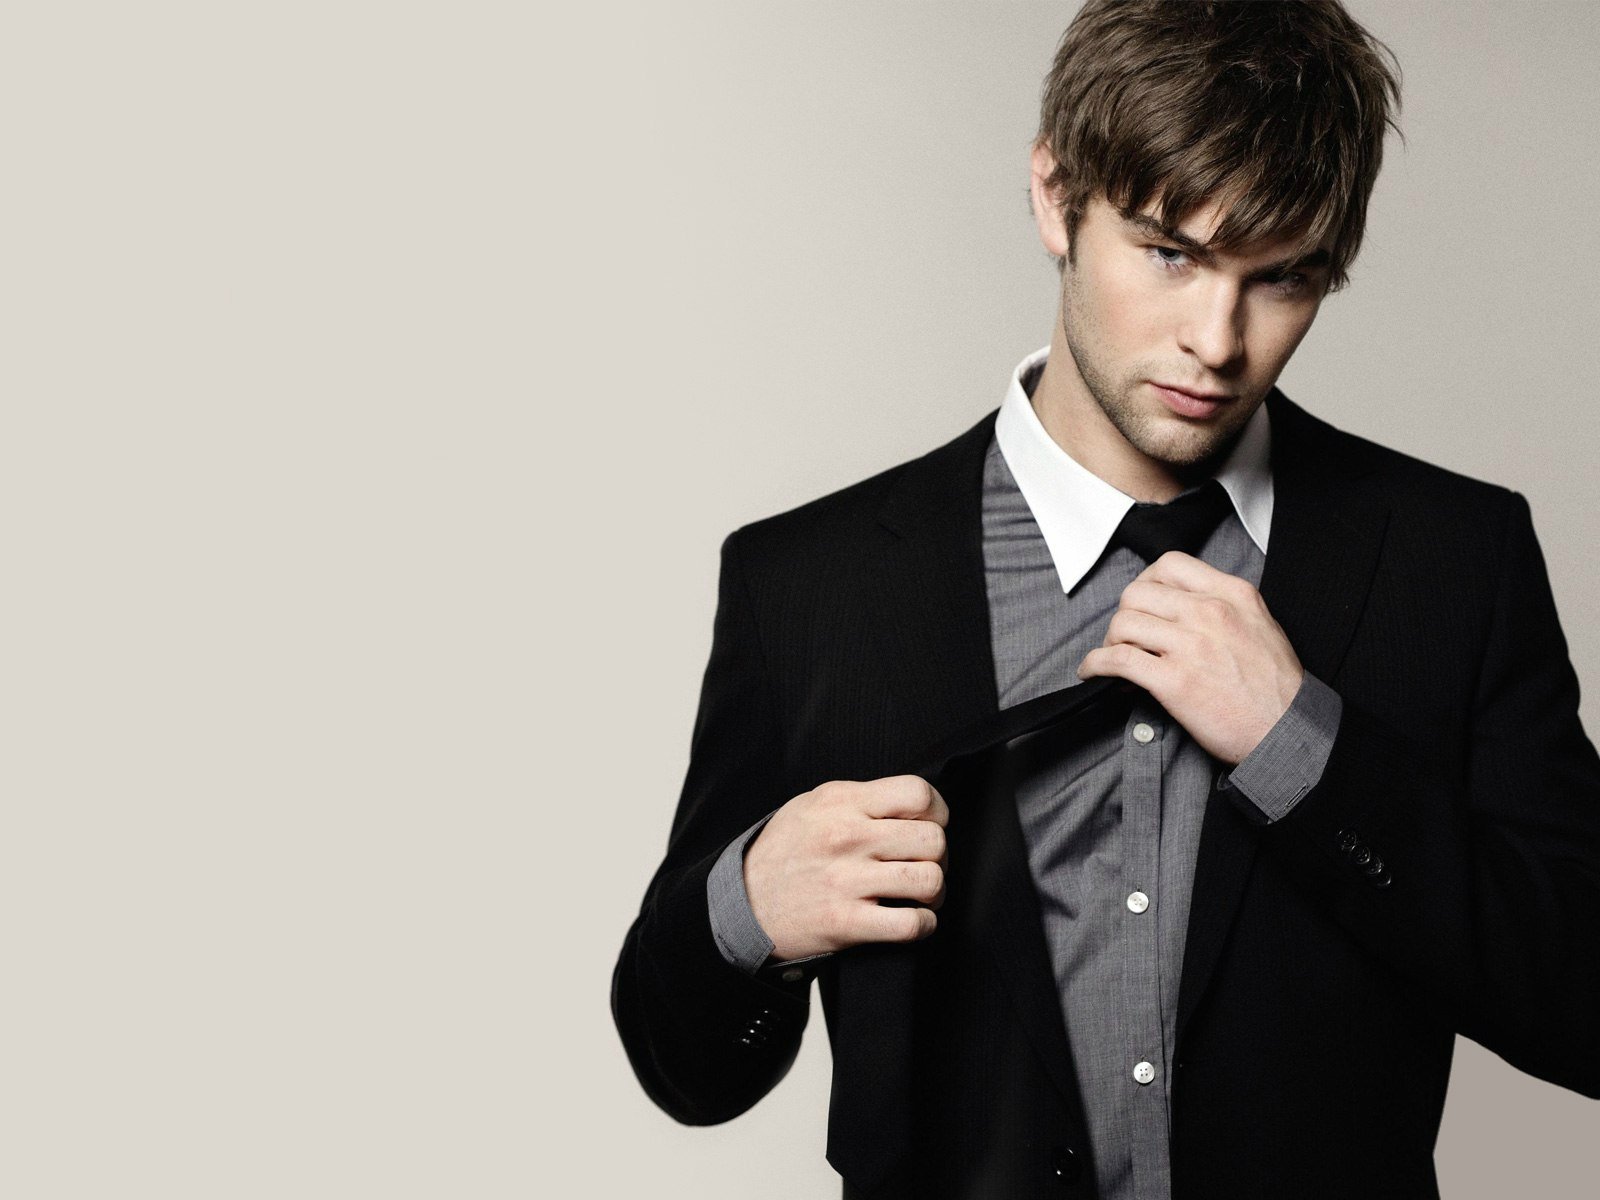 Wallpapers : Gentleman, jacket, tuxedo, clothing, man, look, style, groom, suit, male, gesture, outerwear, formal wear, businessperson, chace crawford, white collar worker 1600x1200